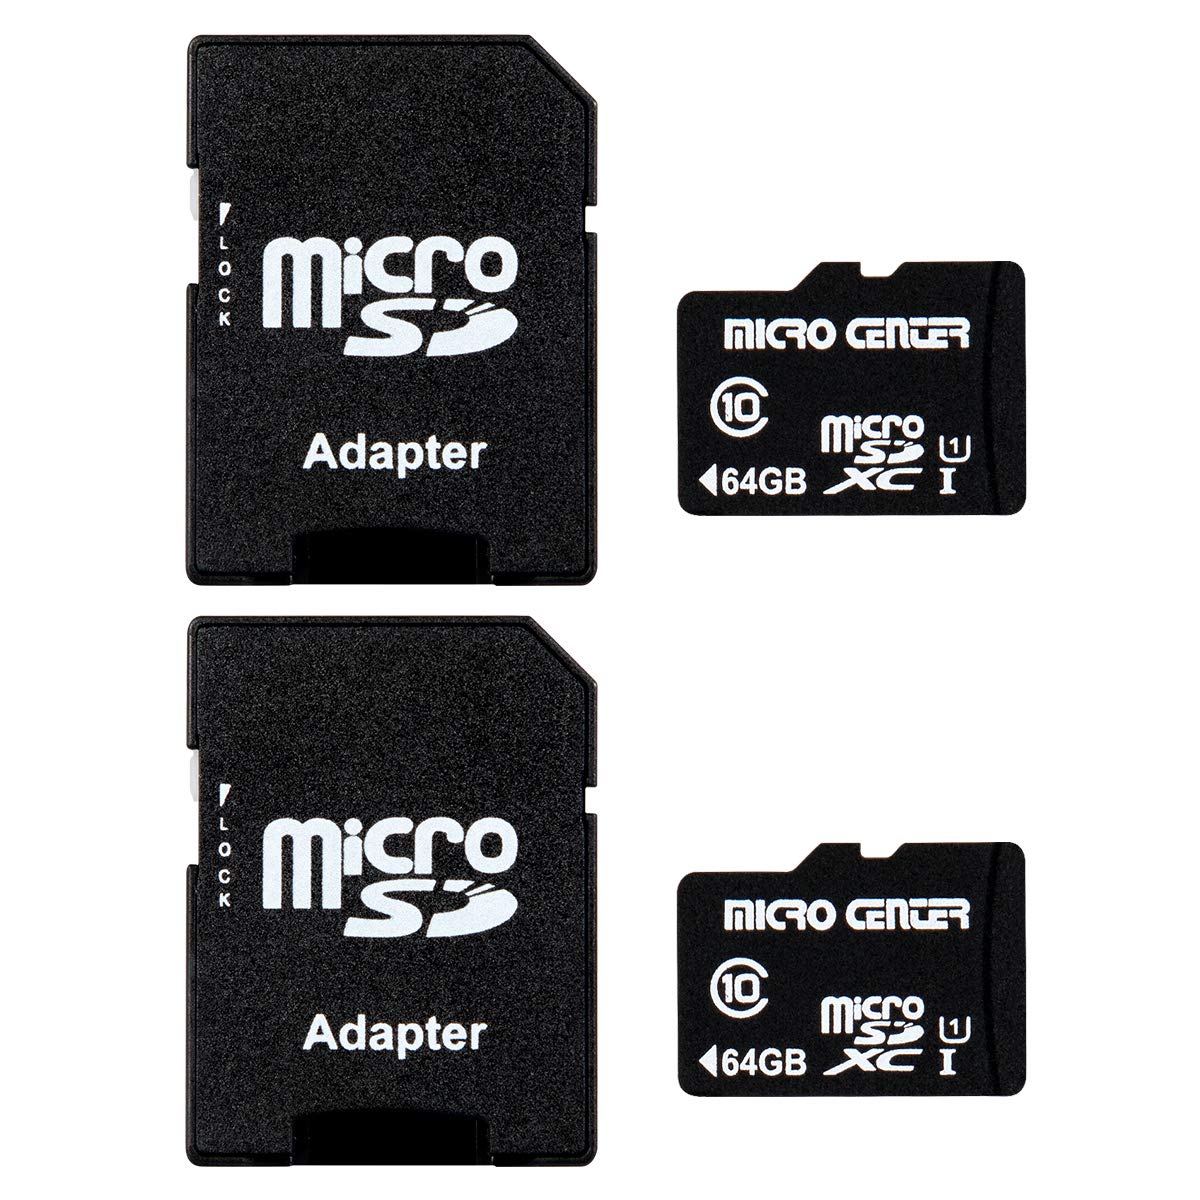 Book Cover Micro Center 64GB Class 10 MicroSDXC Flash Memory Card with Adapter for Mobile Device Storage Phone, Tablet, Drone & Full HD Video Recording - 80MB/s UHS-I, C10, U1 (2 Pack) 64GB - 2 pack